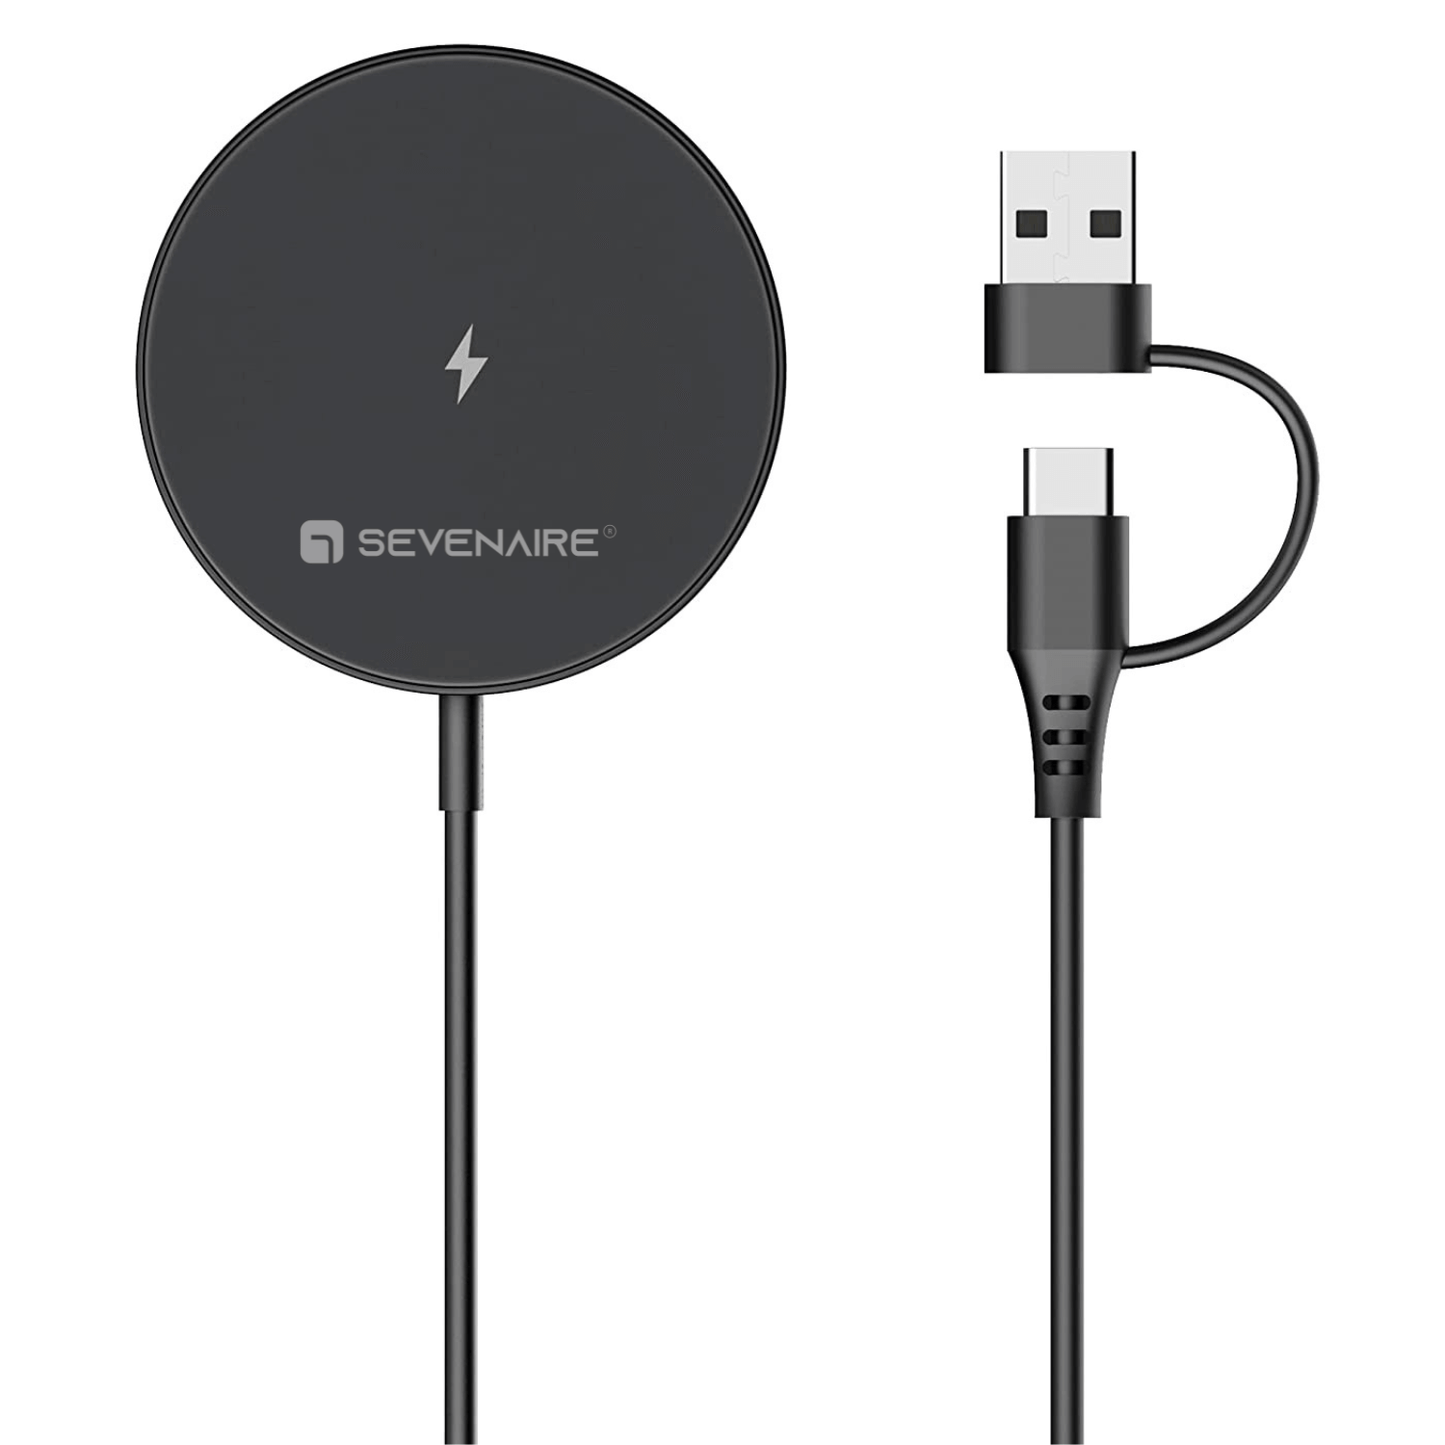 MagCharge 450 Wireless Mag-Safe Charger